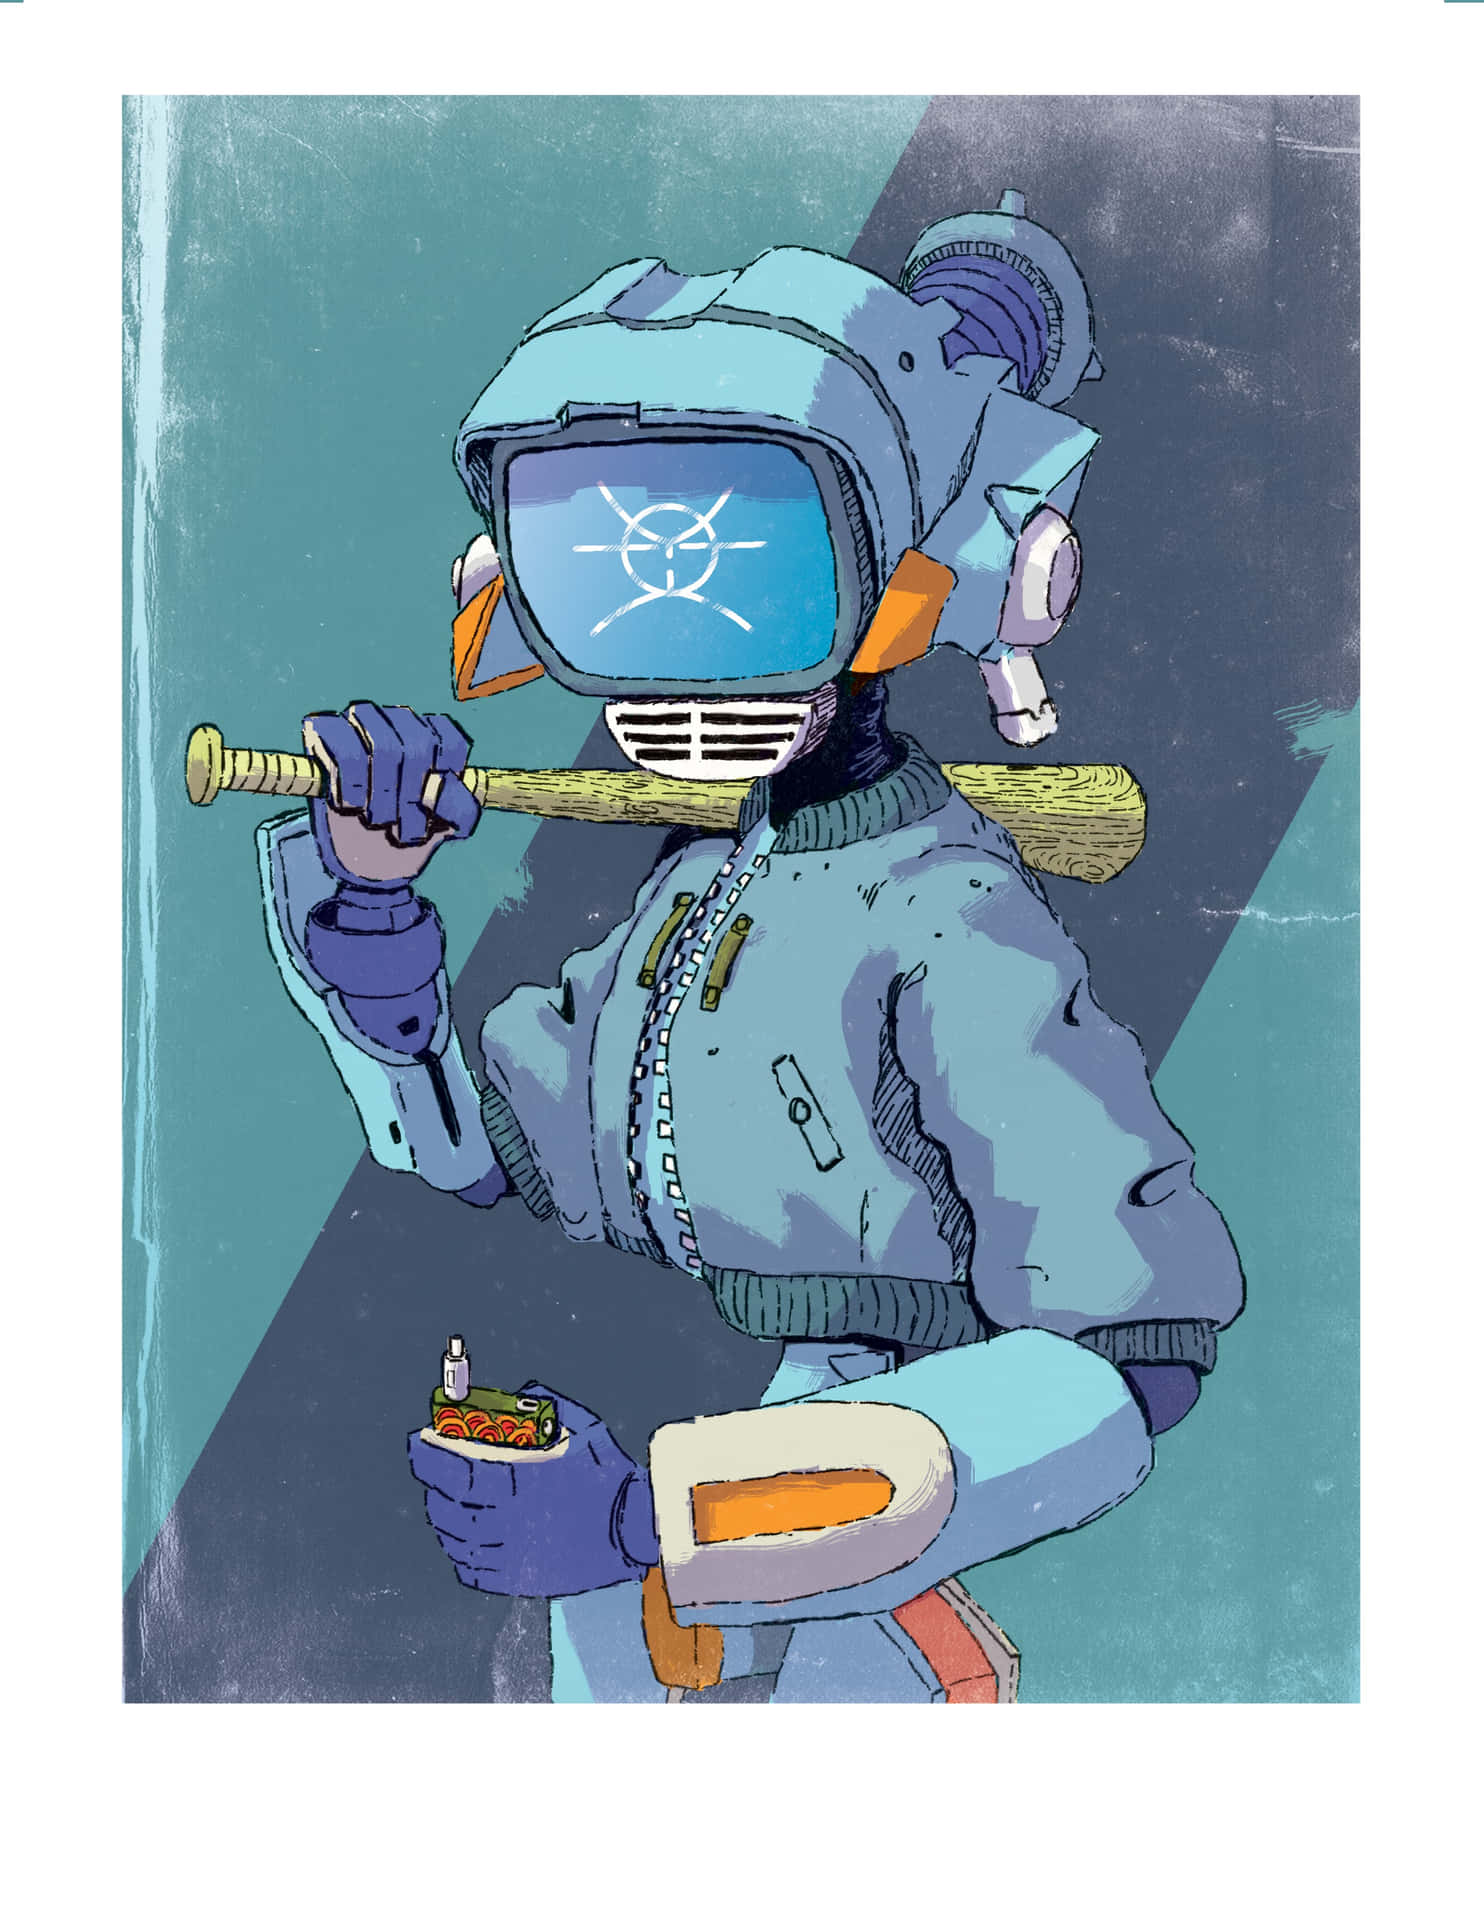 FLCL's Canti - The Ultimate Robot Protector Wallpaper